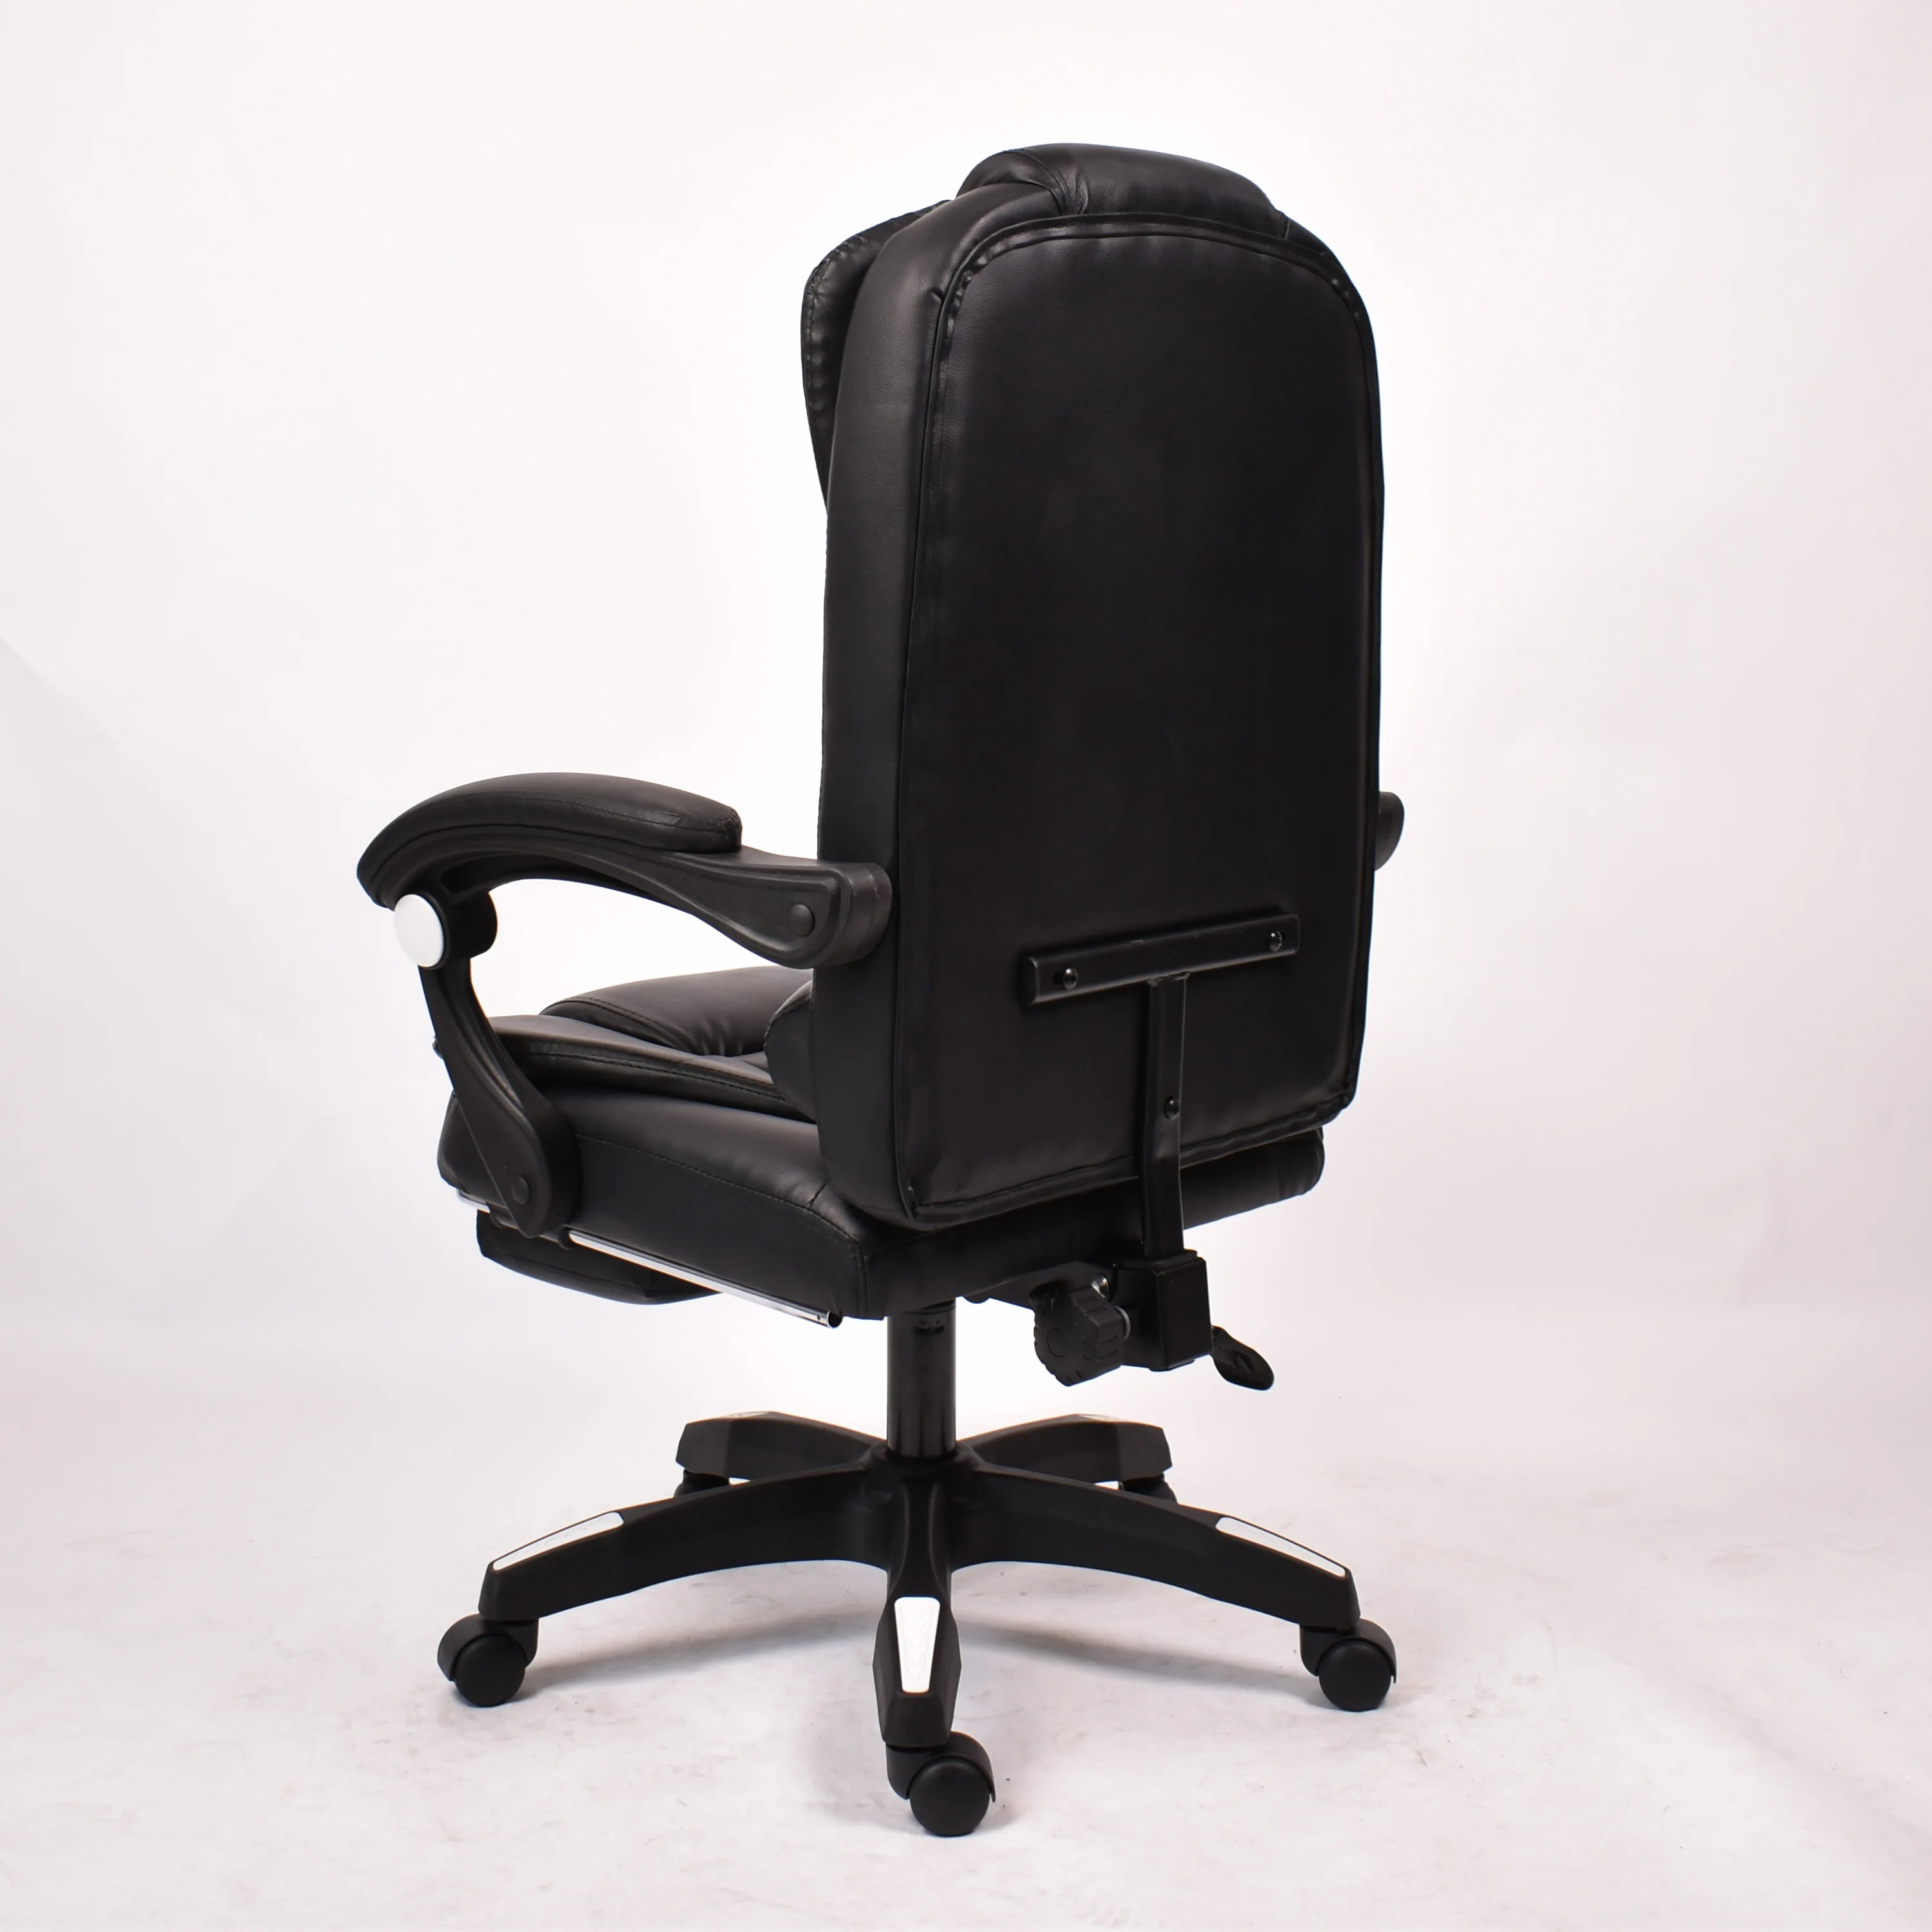 2021 NEW Boss swivel chair Conference Chair manager functional Office Chair